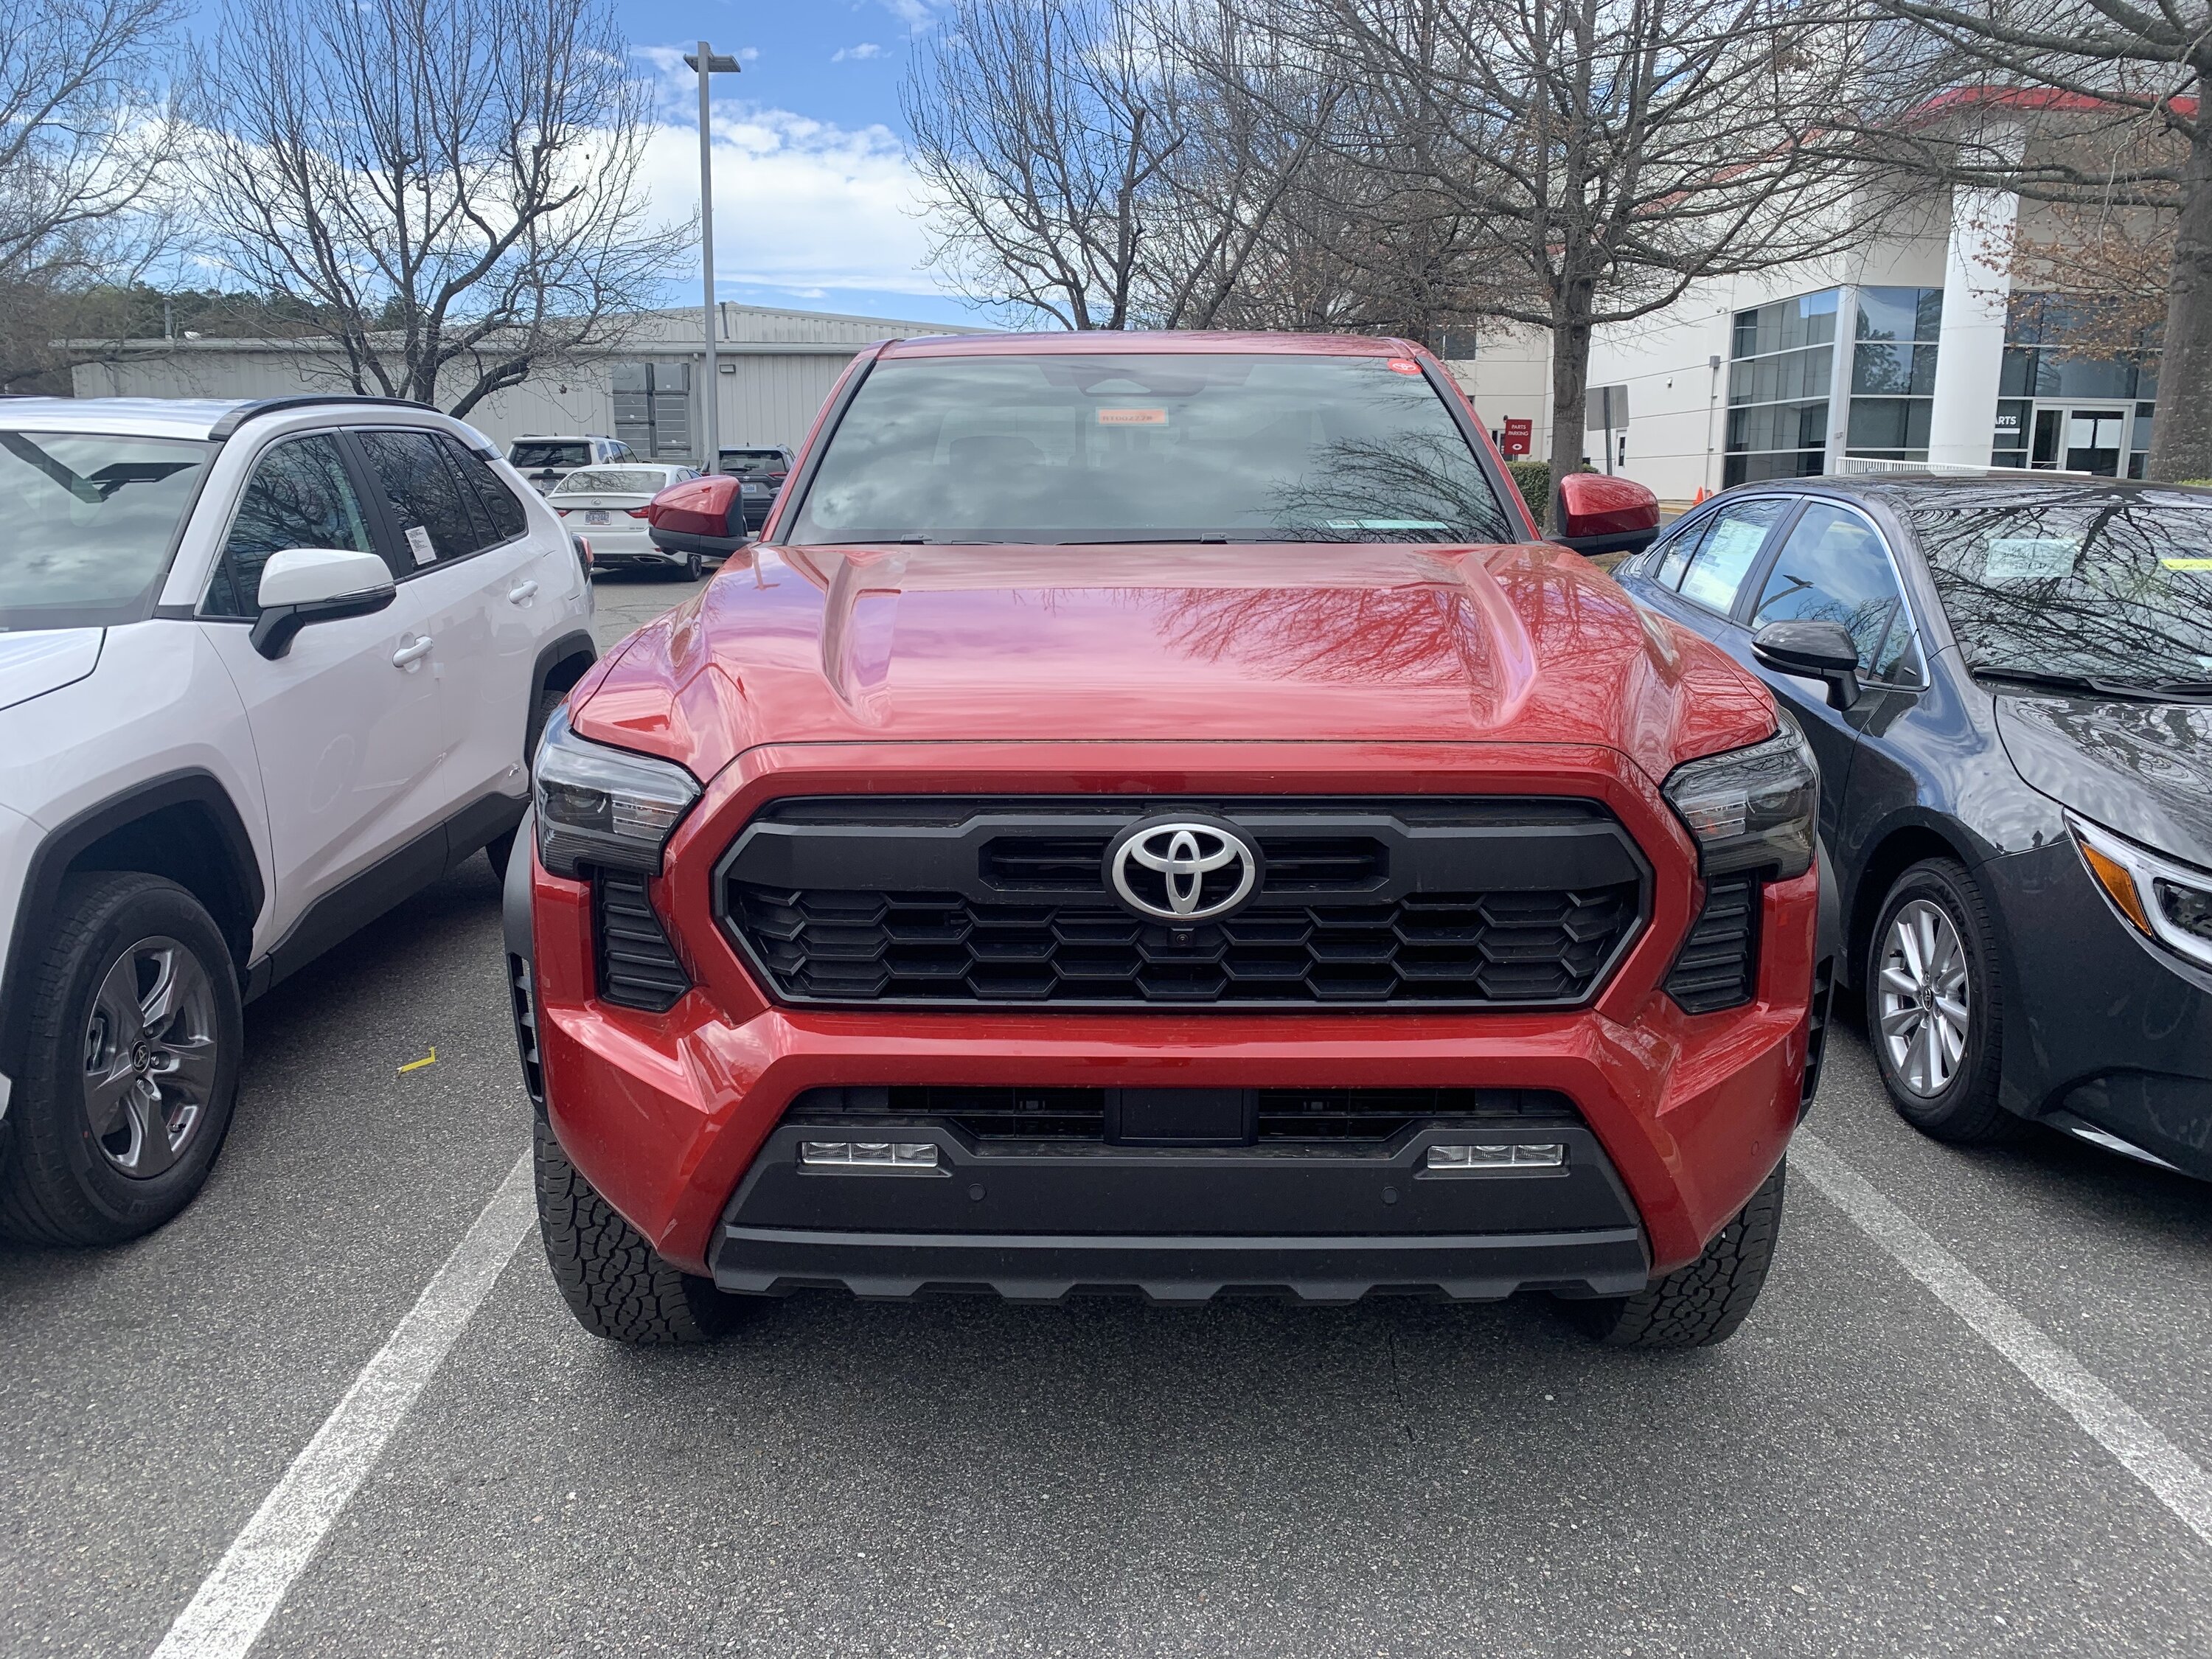 2024 Tacoma Supersonic Red TRD Off-road Premium delivery in NC IMG_0833